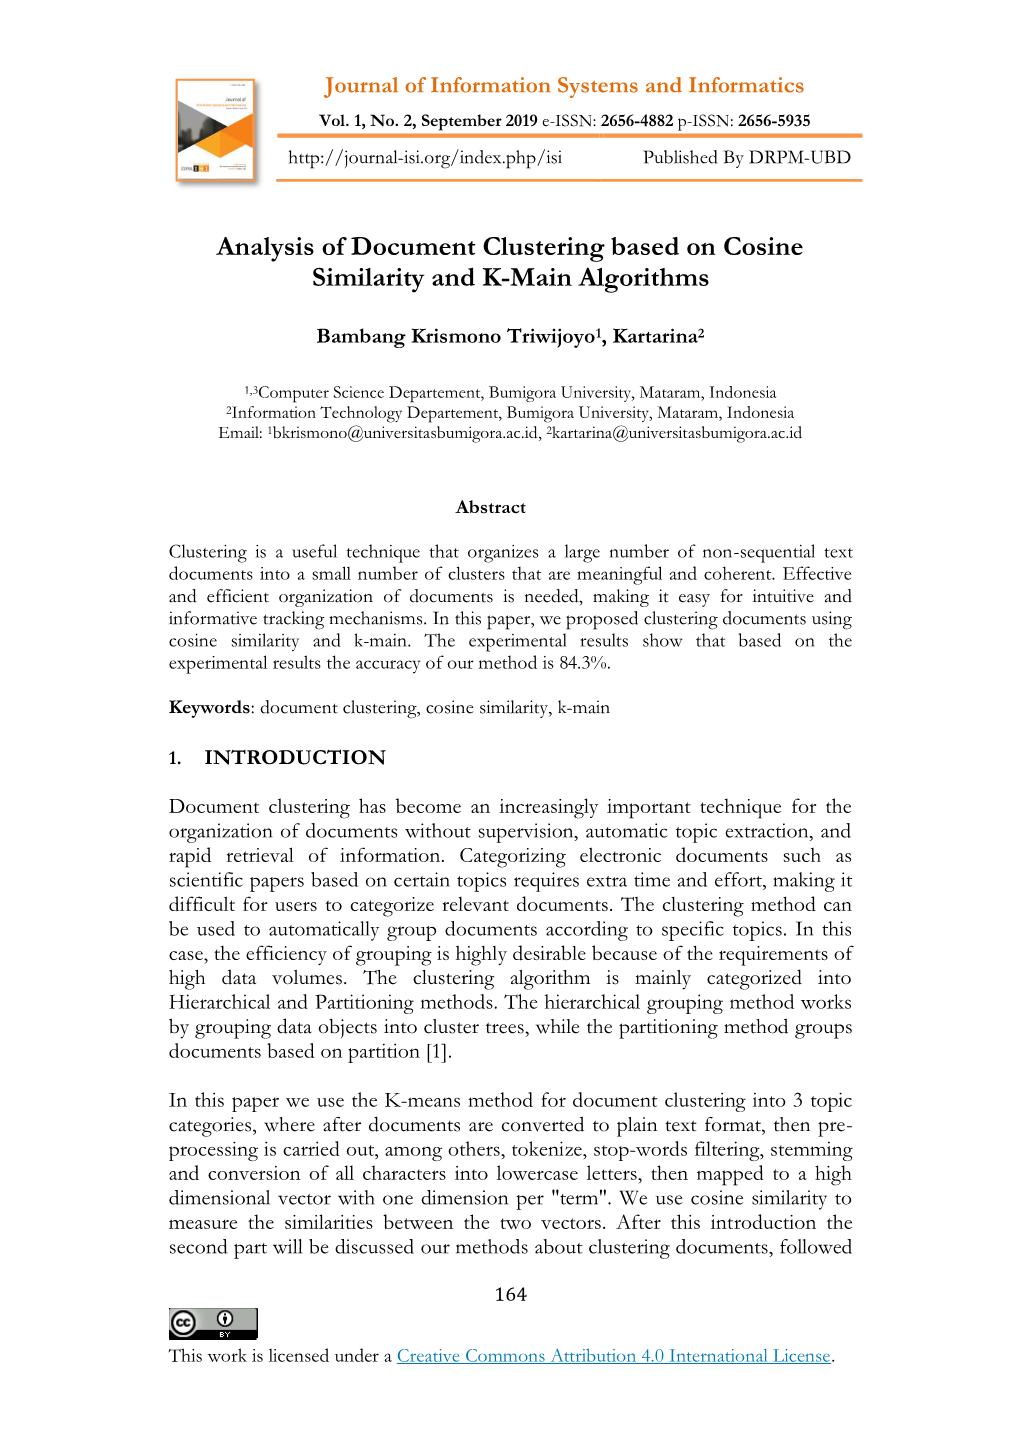 Analysis of Document Clustering Based on Cosine Similarity and K-Main Algorithms